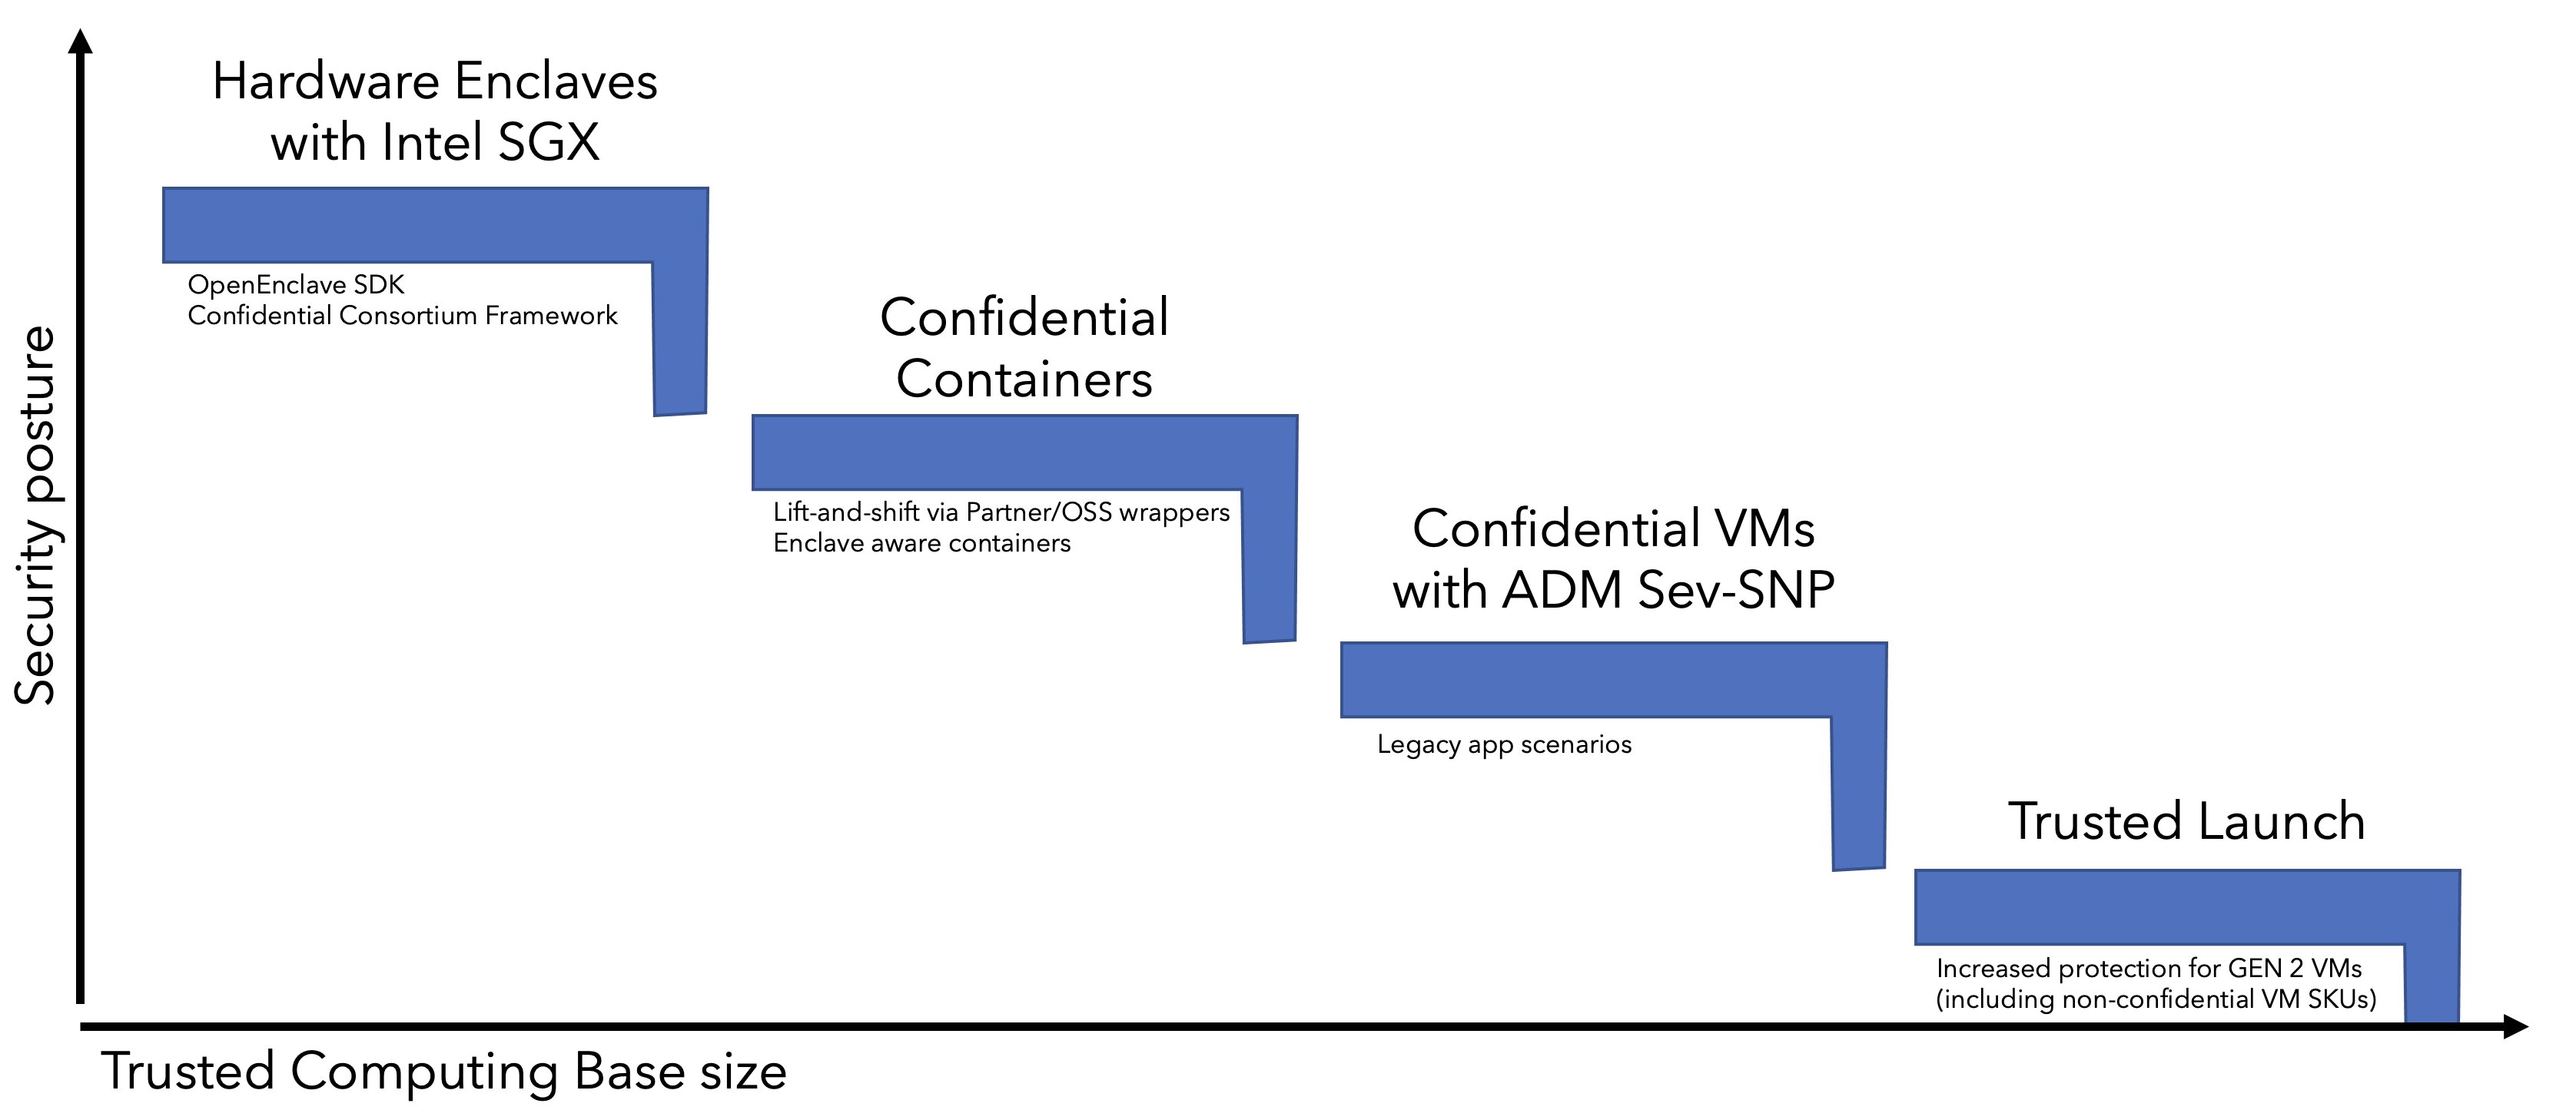 An image of the, so called, trust ladder. Hardware enclaves with Intel SGX give the highest security posture at the lowest trusted computing base size. Confidential containers are ranked second highest, followed by Confidential VMs and Trusted Launch. We will discuss all of these options in a moment.